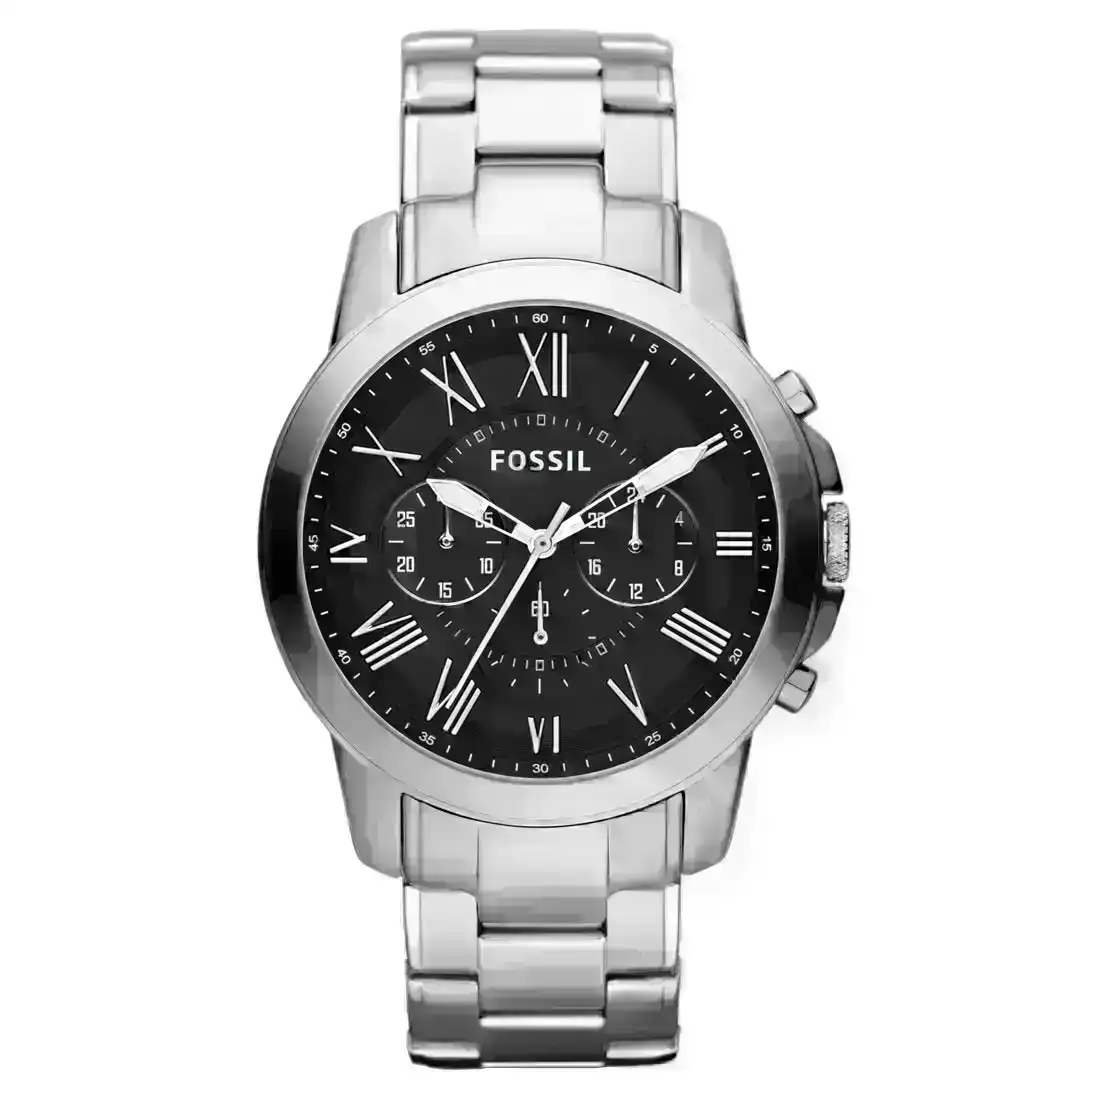 Fossil Mens Chronograph Watch FS4736